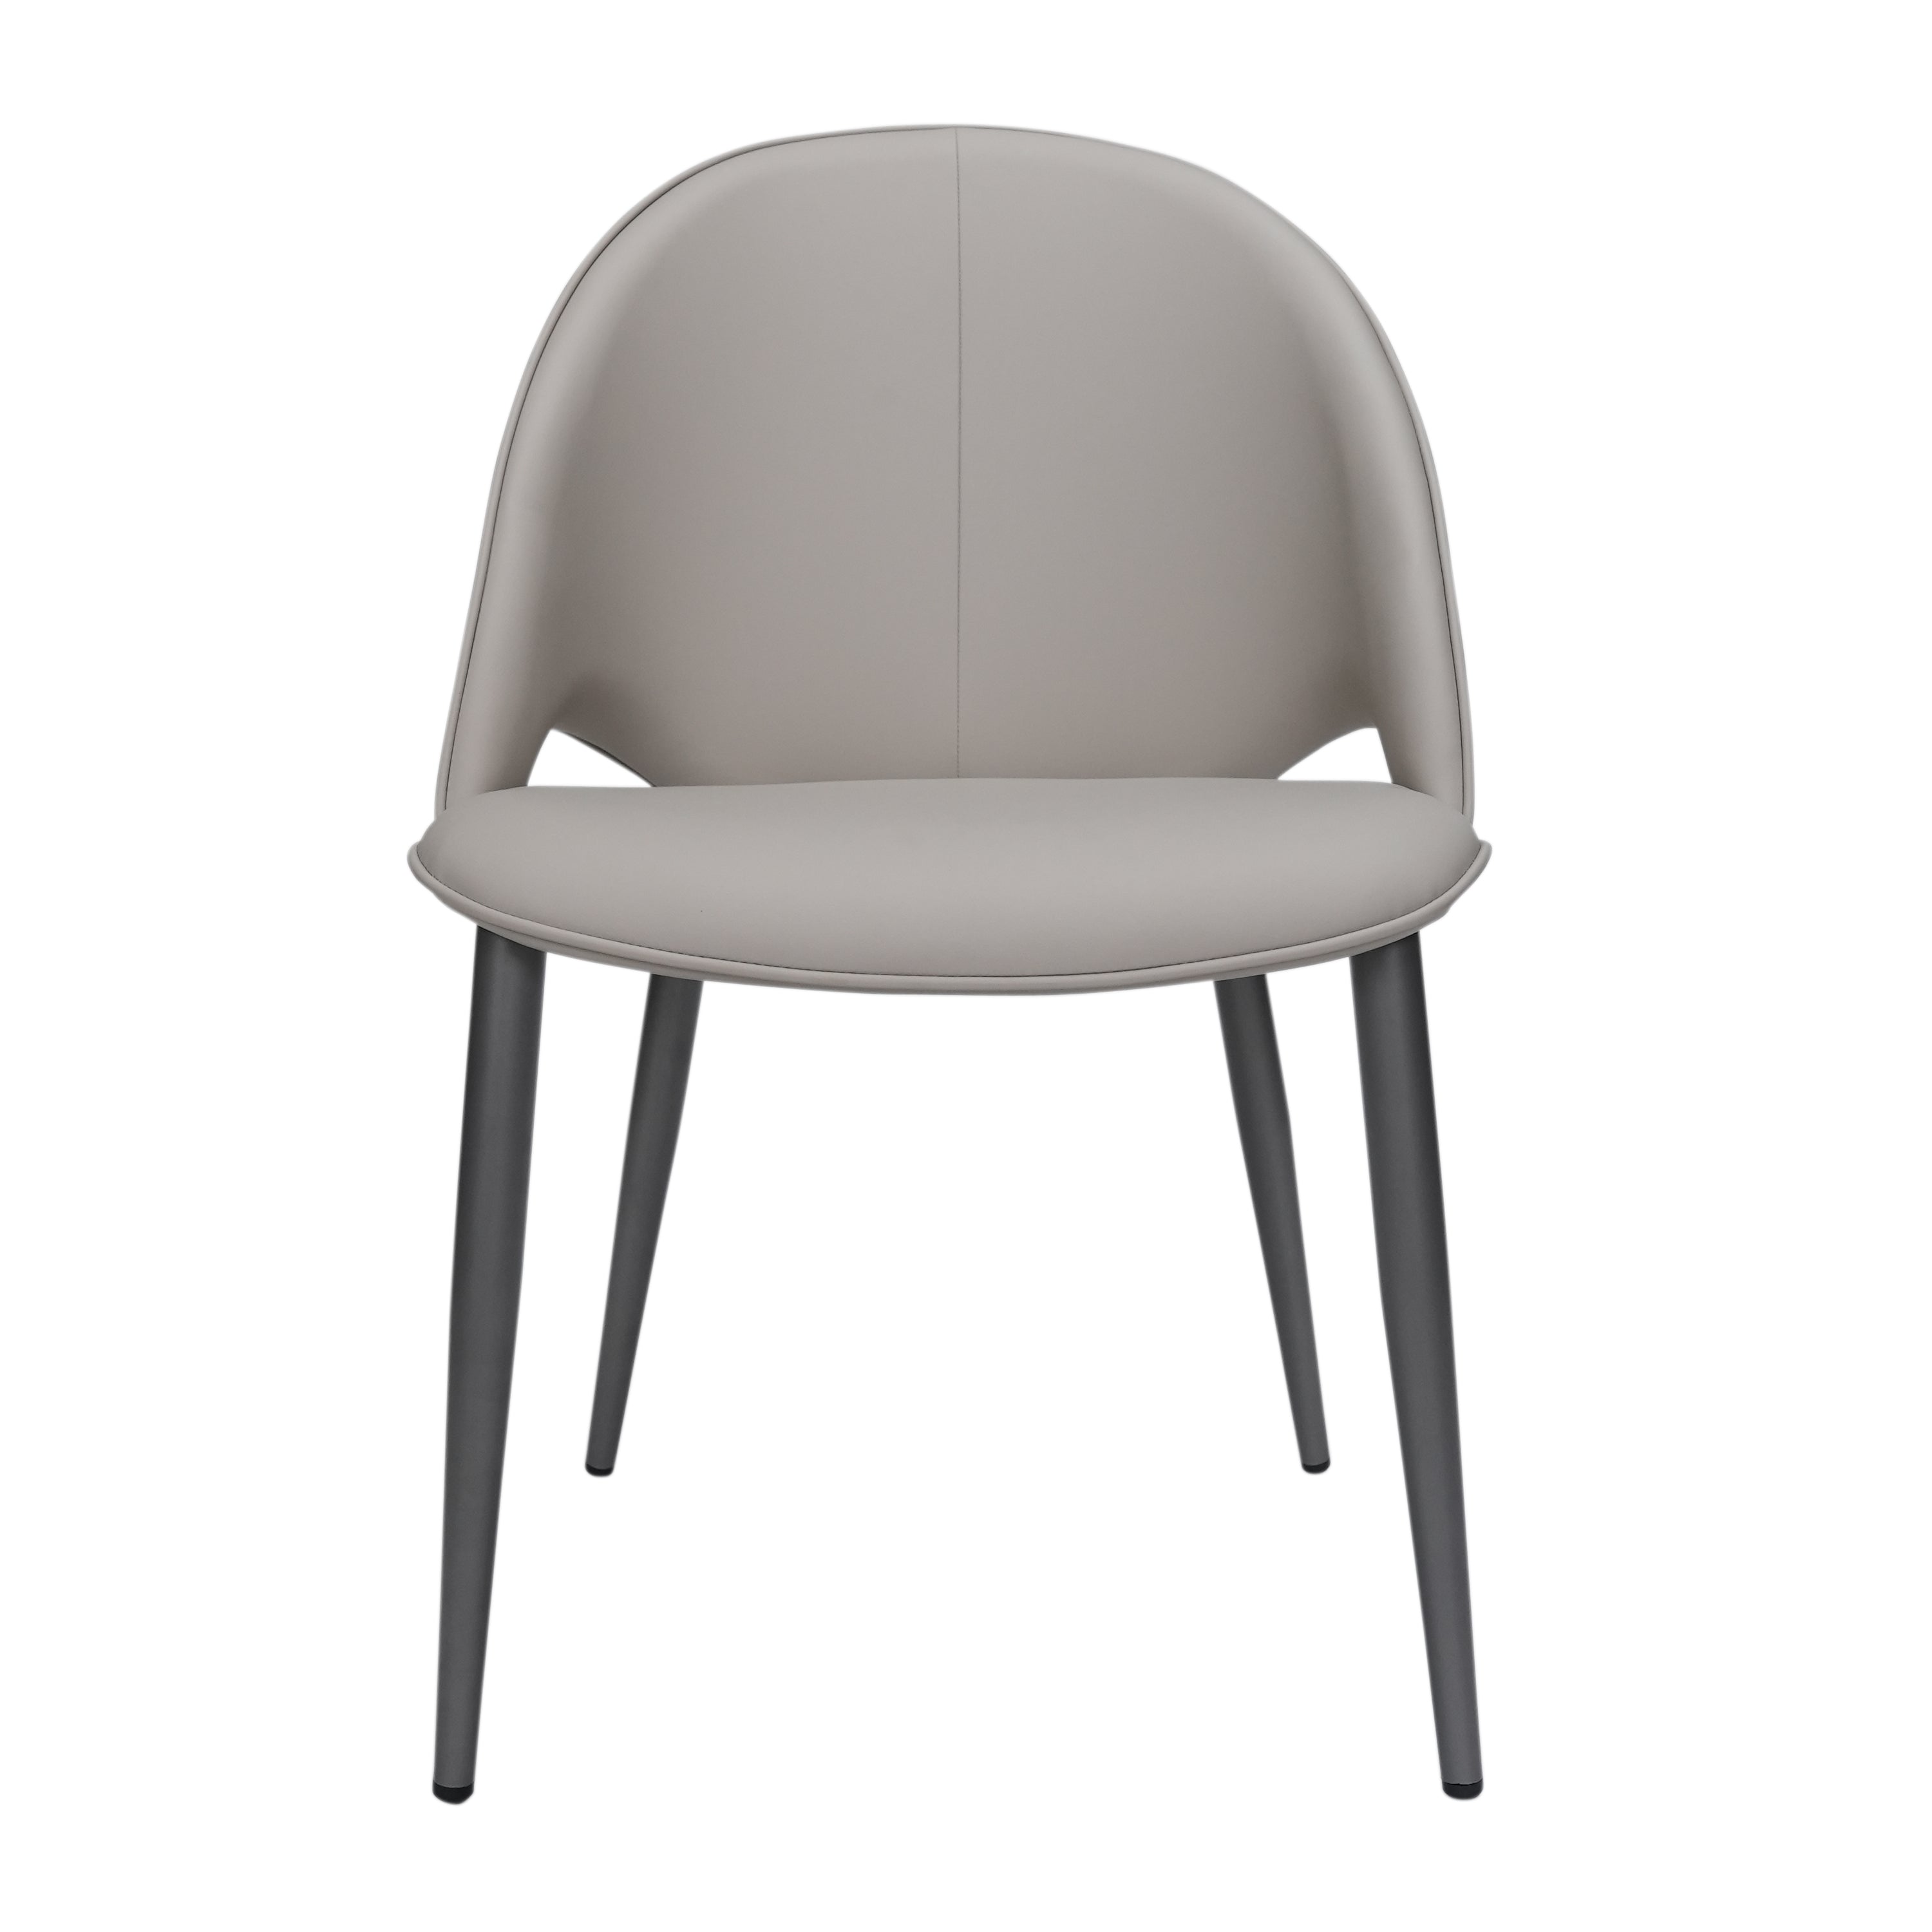 Savona Chair Pu Leather Upholstered With Metal Legs - White